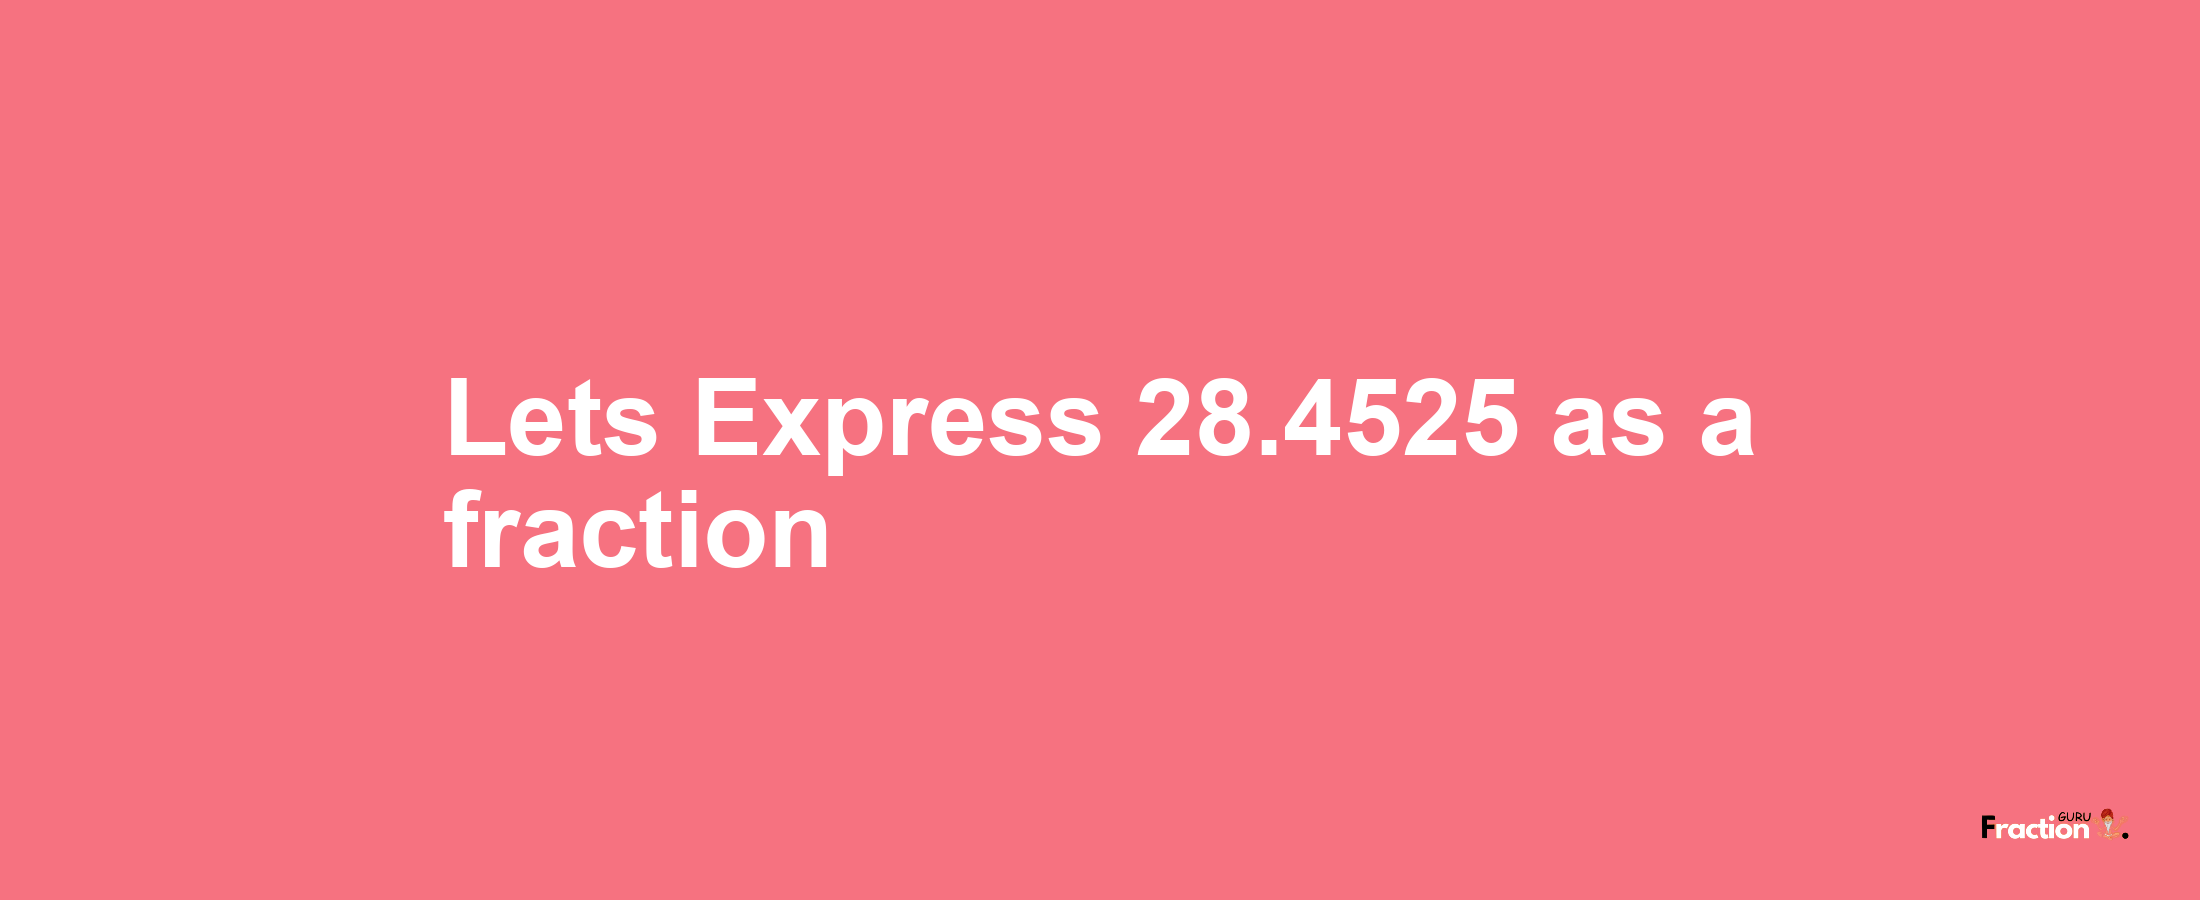 Lets Express 28.4525 as afraction